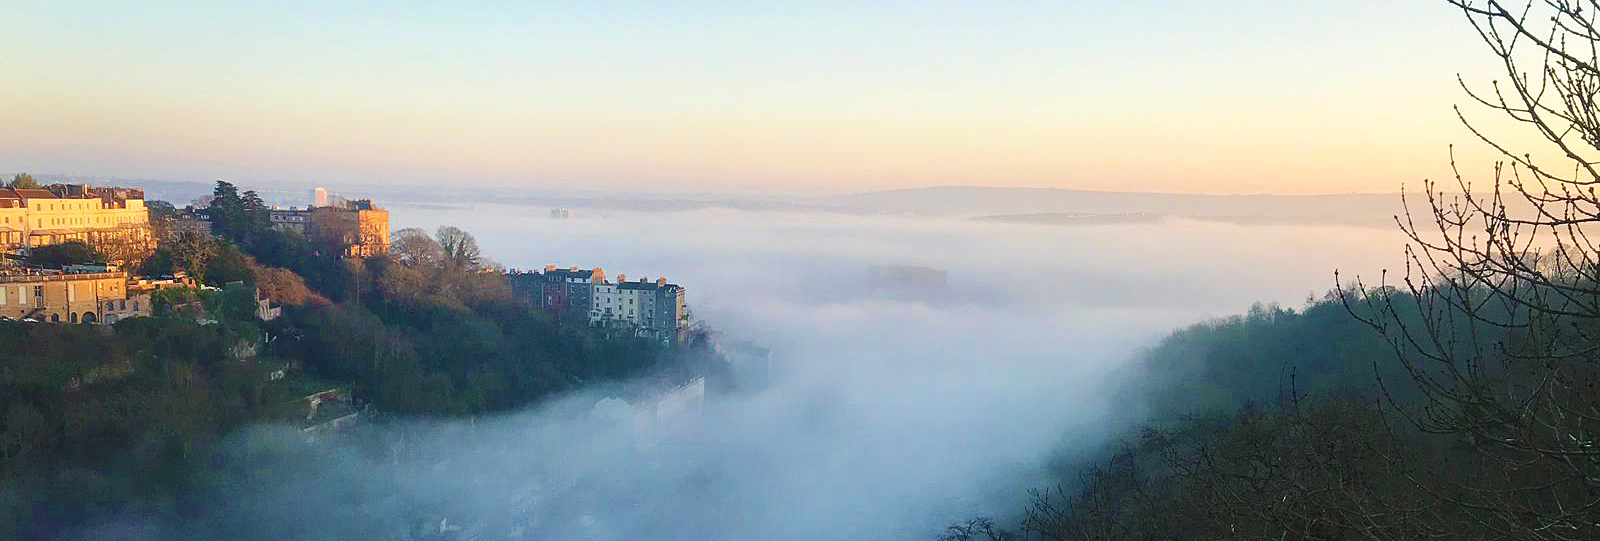 View from Clifton Suspension Bridge looking back into Bristol with low level mist.